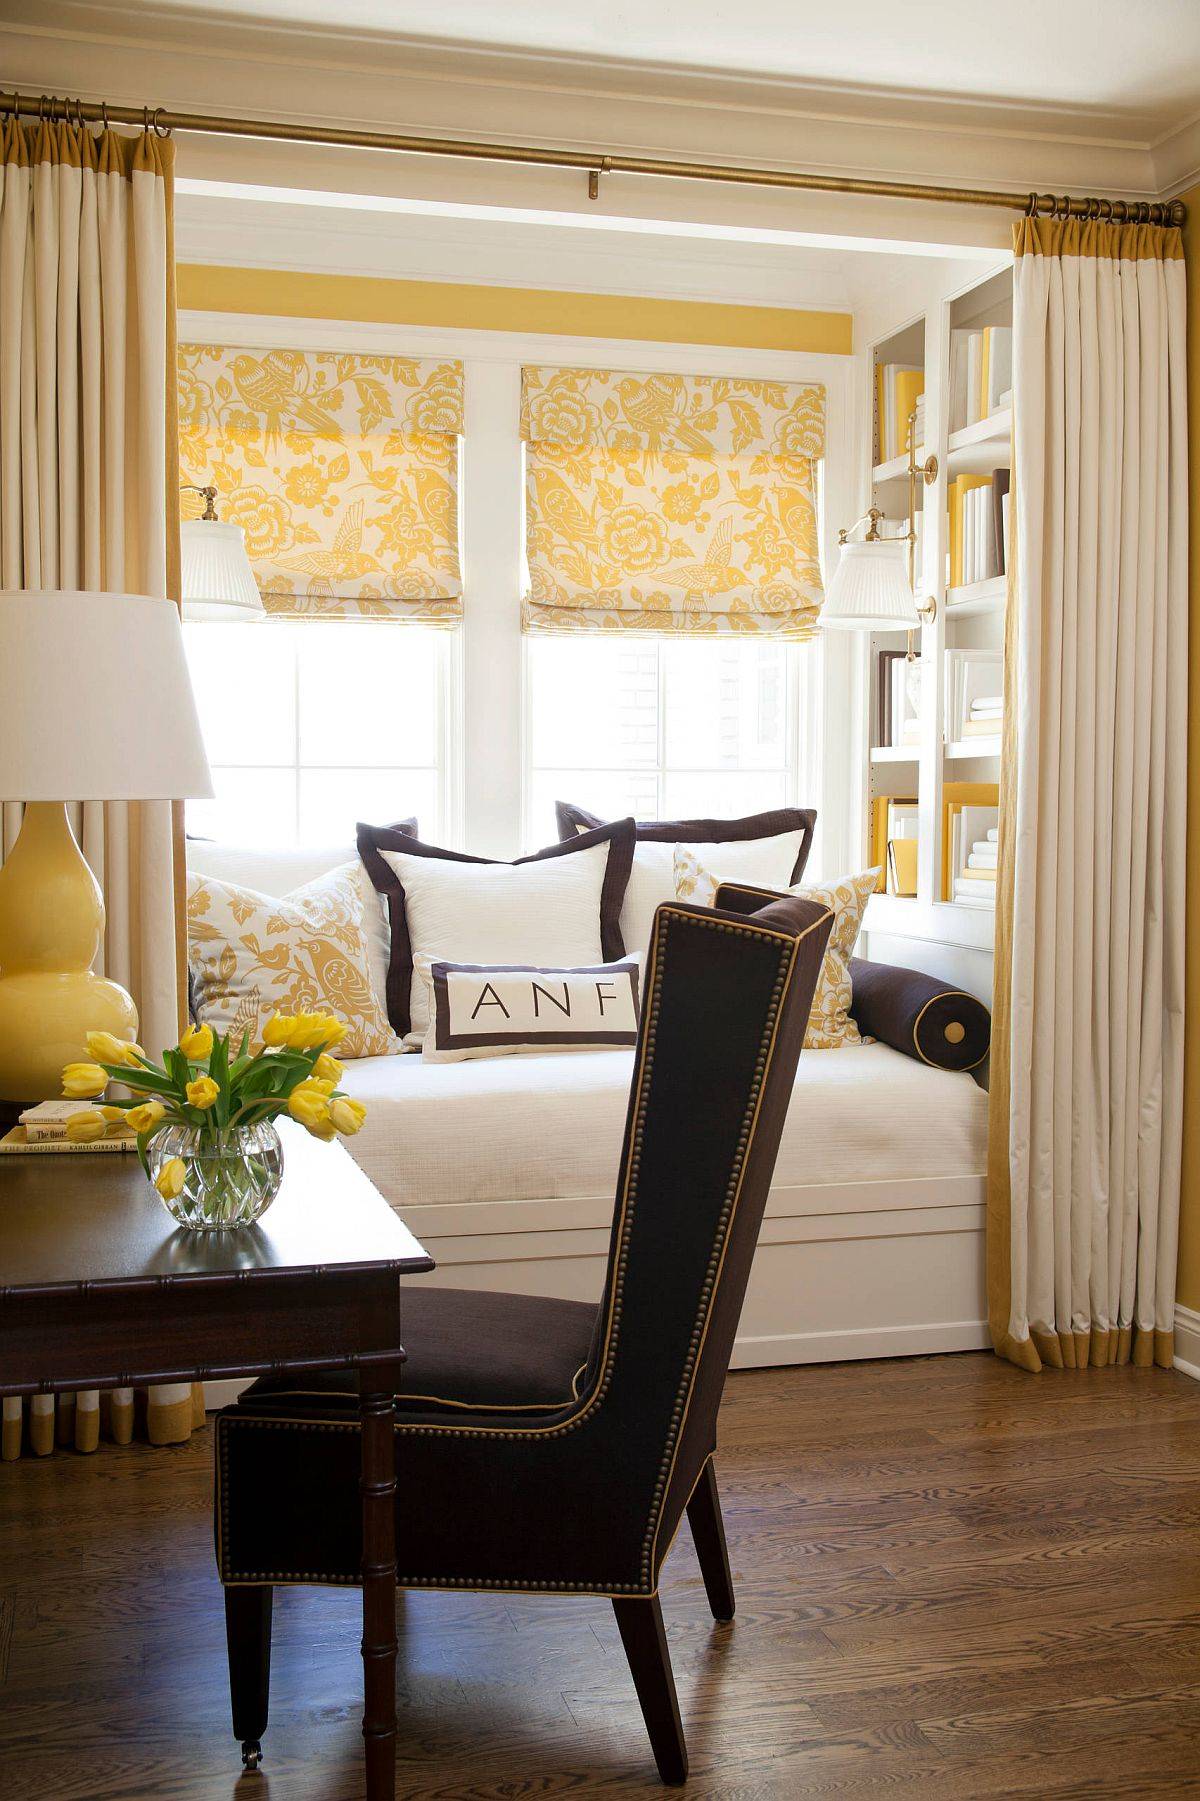 Drapes-for-the-window-seat-make-it-an-more-more-dreamy-and-reclusive-setting-80665